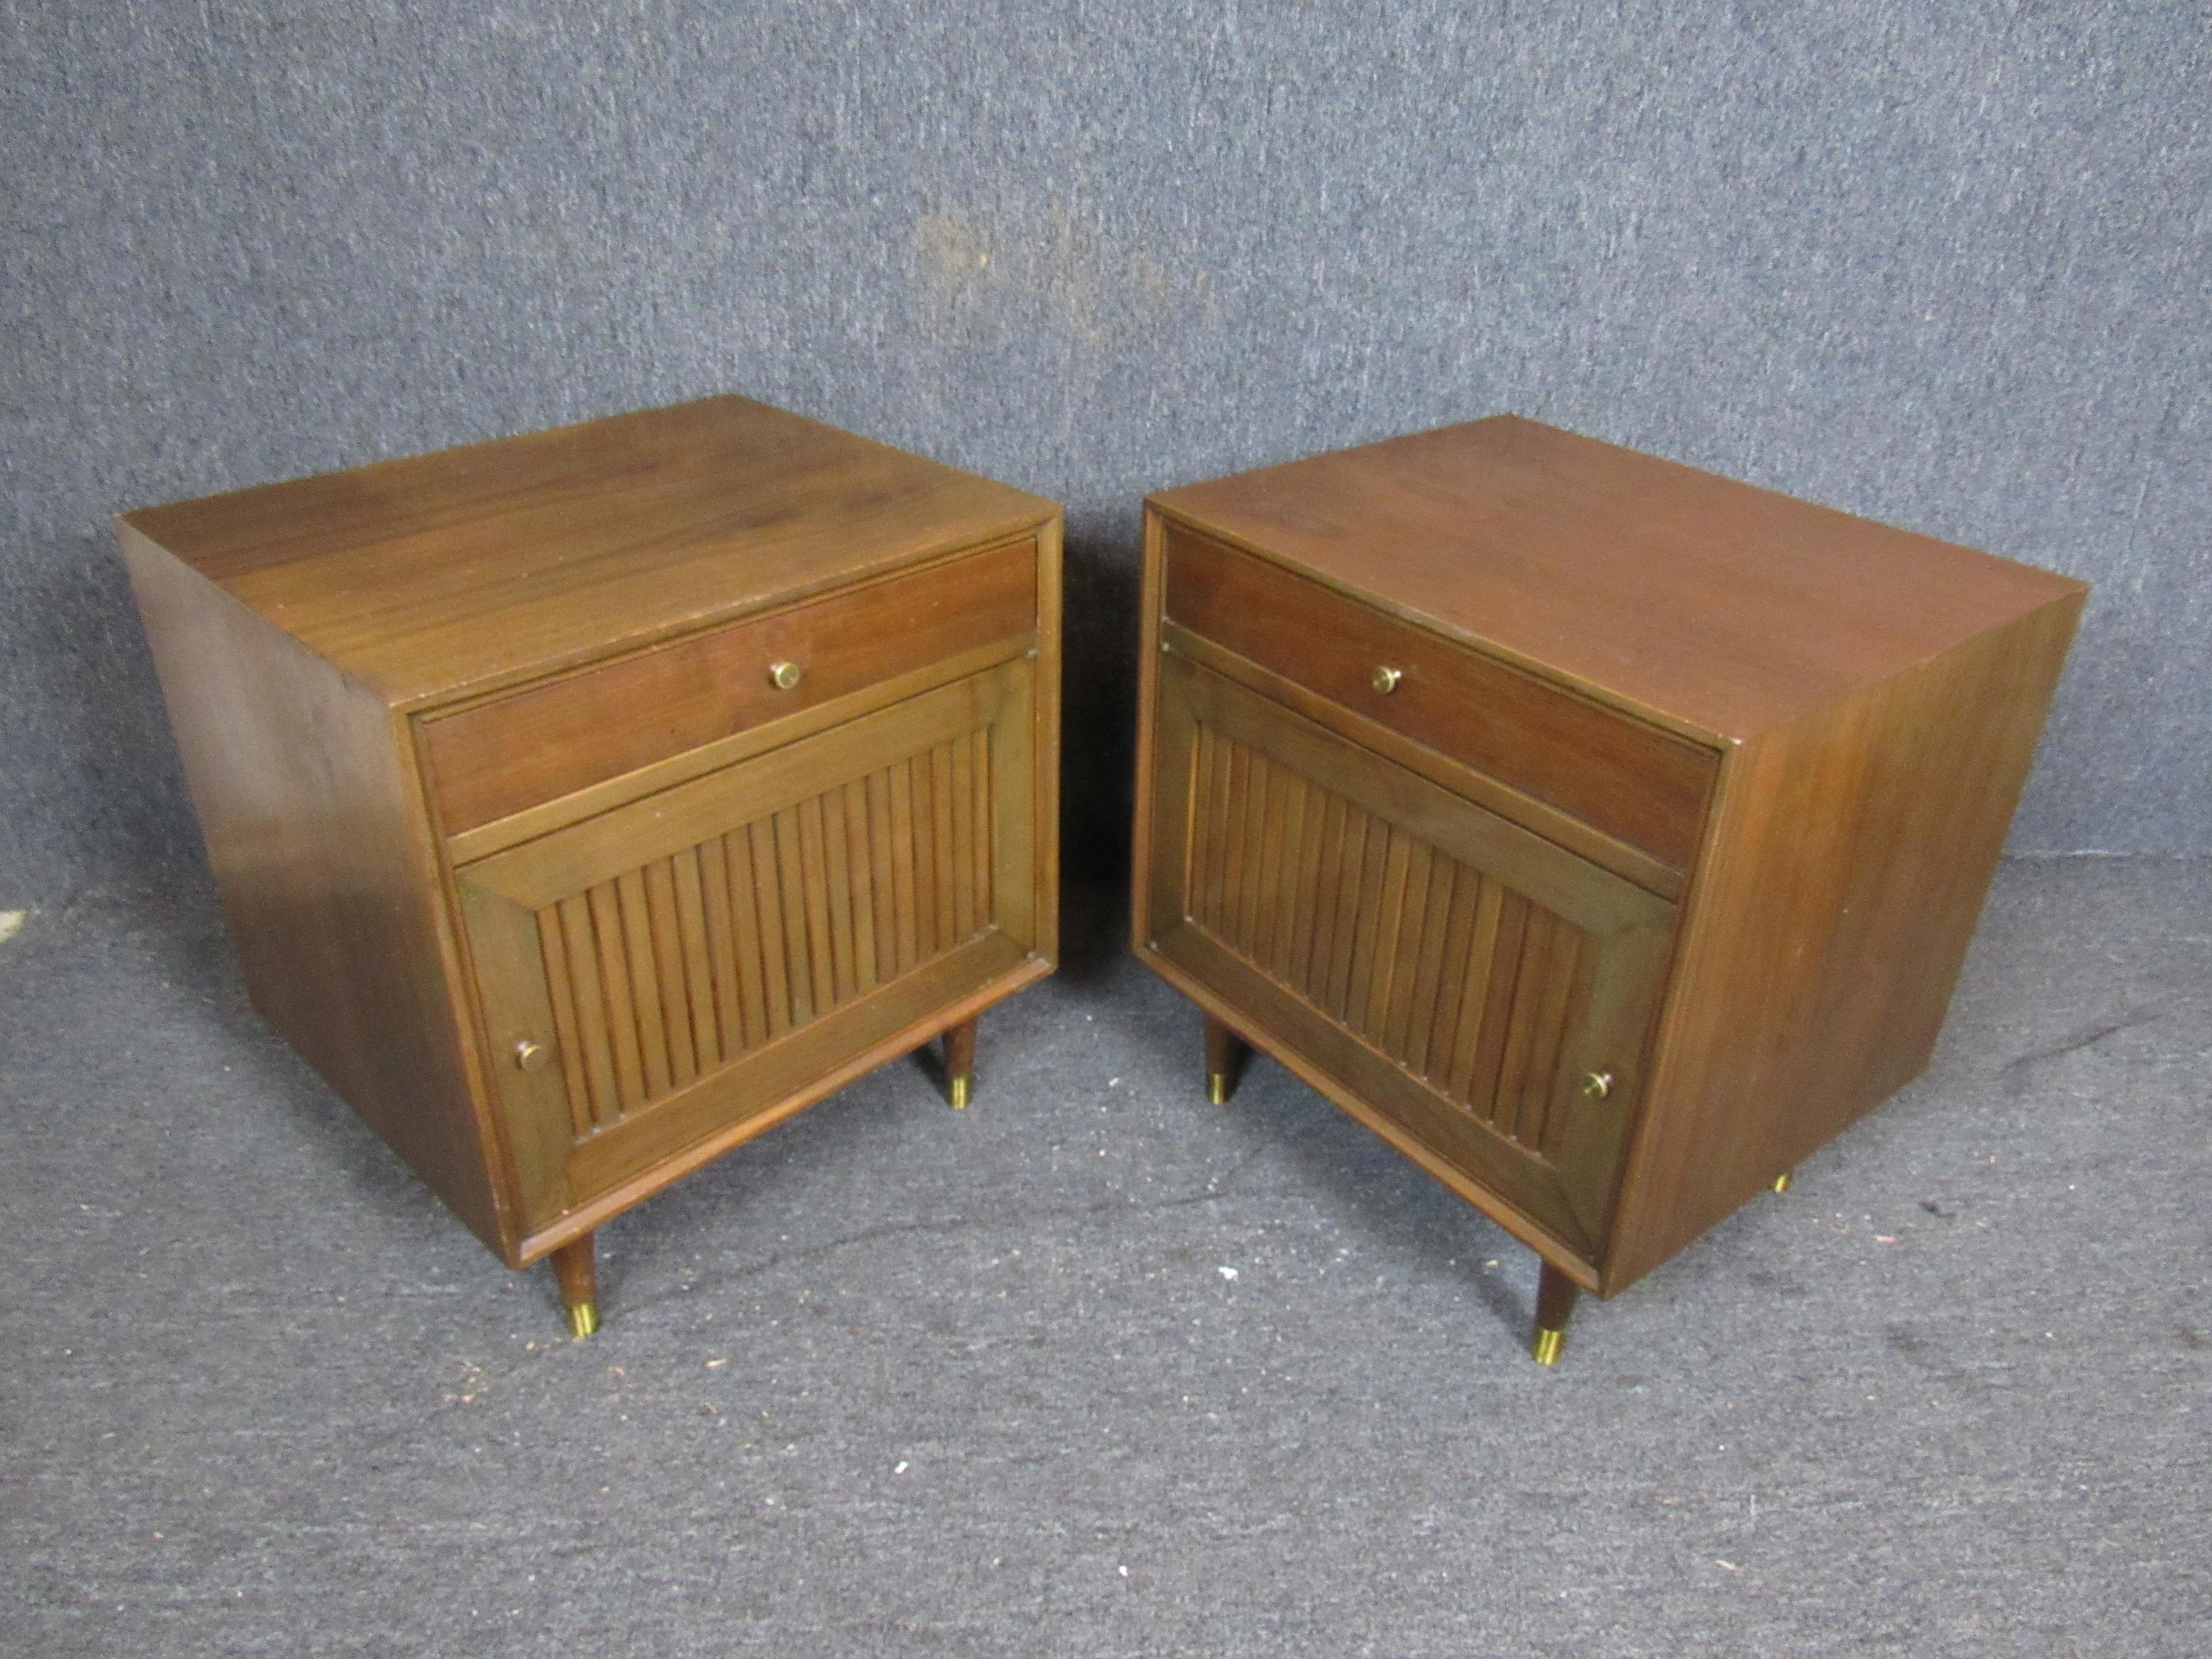 Fantastic pair of vintage Mid-Century Modern walnut and brass nightstands designed by Mark Furst and Robert Fellner for Furnette Inc. in New York. Terrific natural wood grain is accented by minimalist brass hardware, while planked front doors add